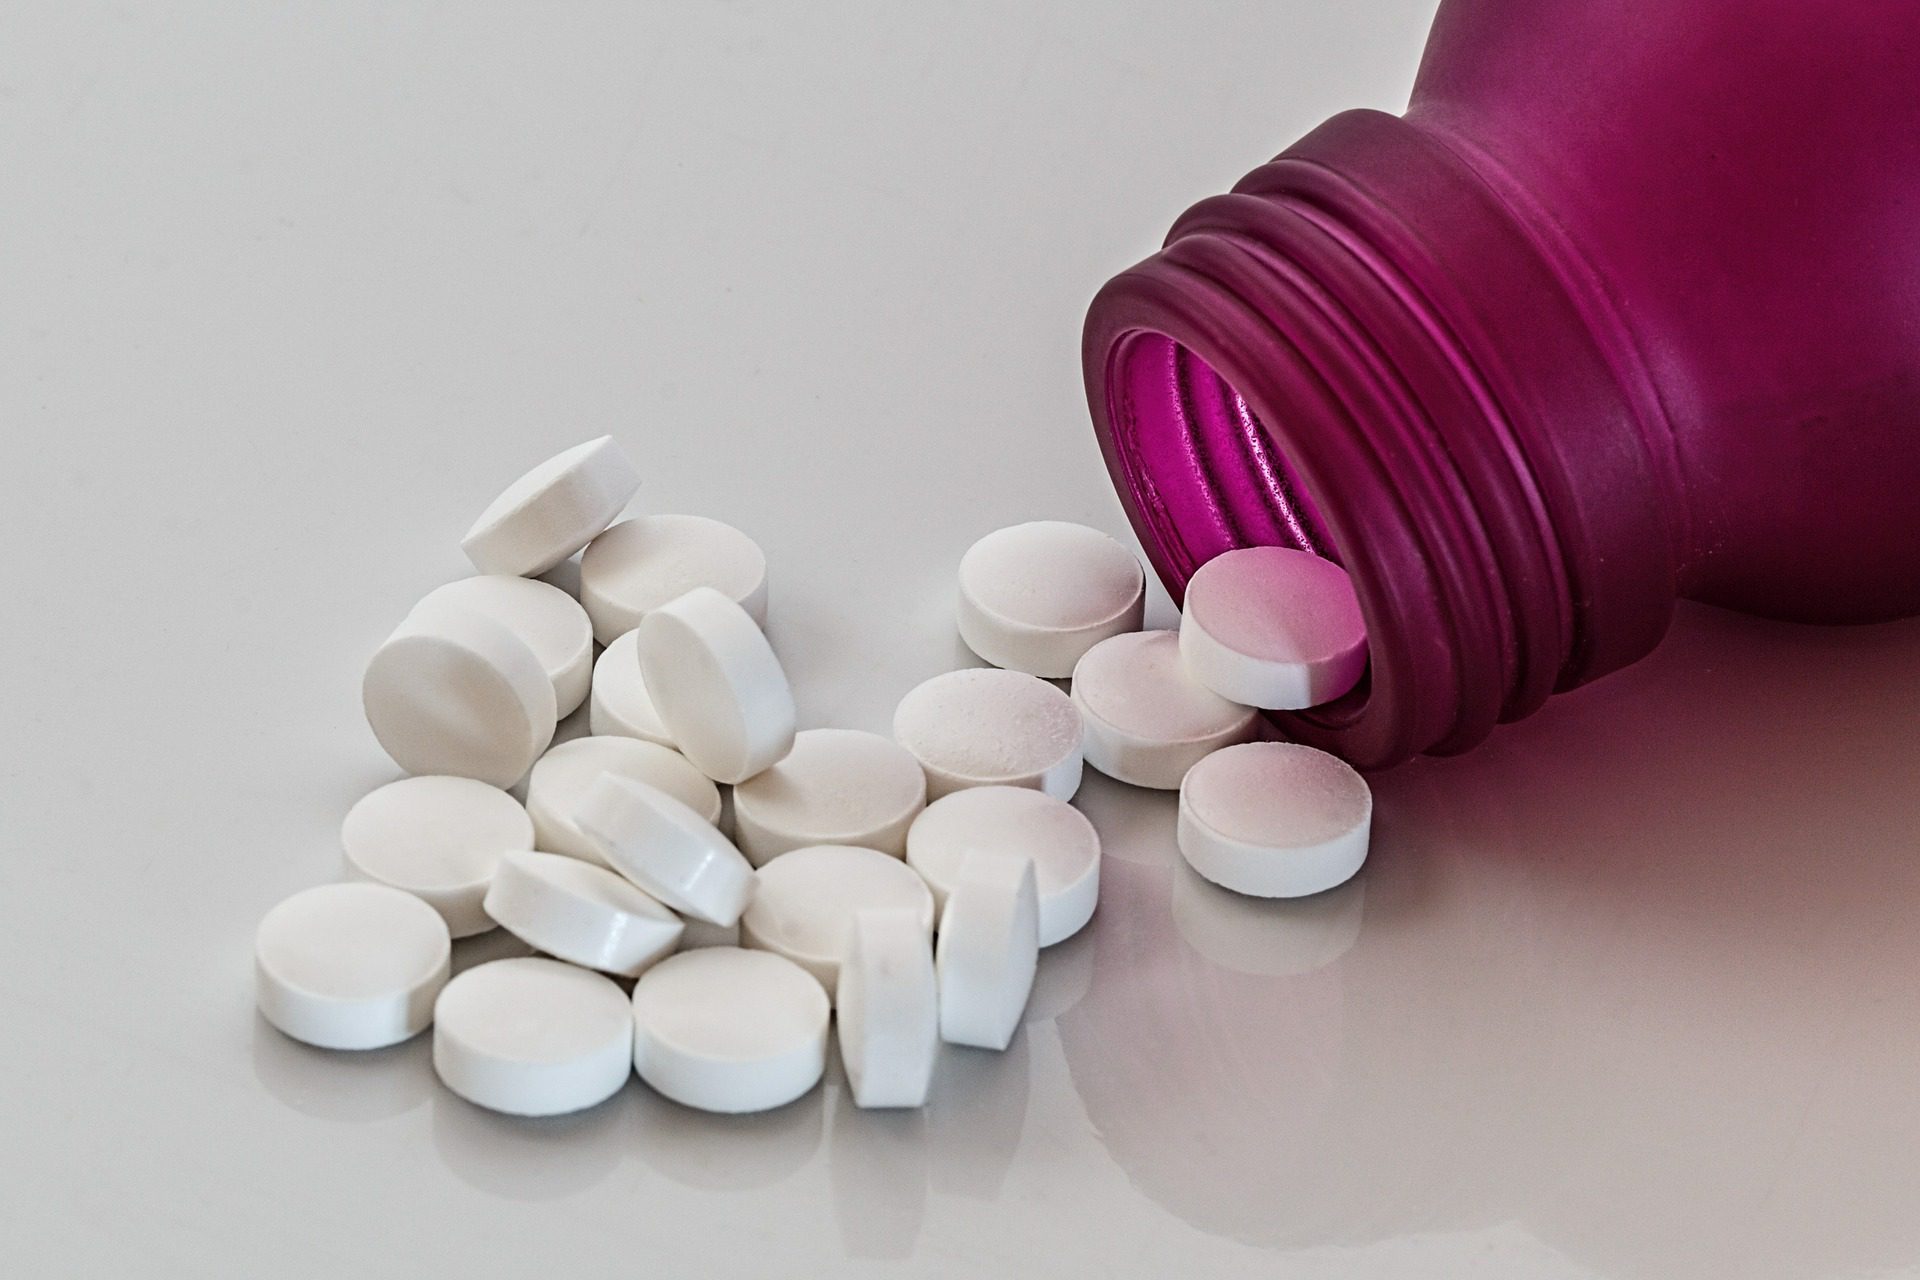 What are Signs of Prescription Drug Abuse